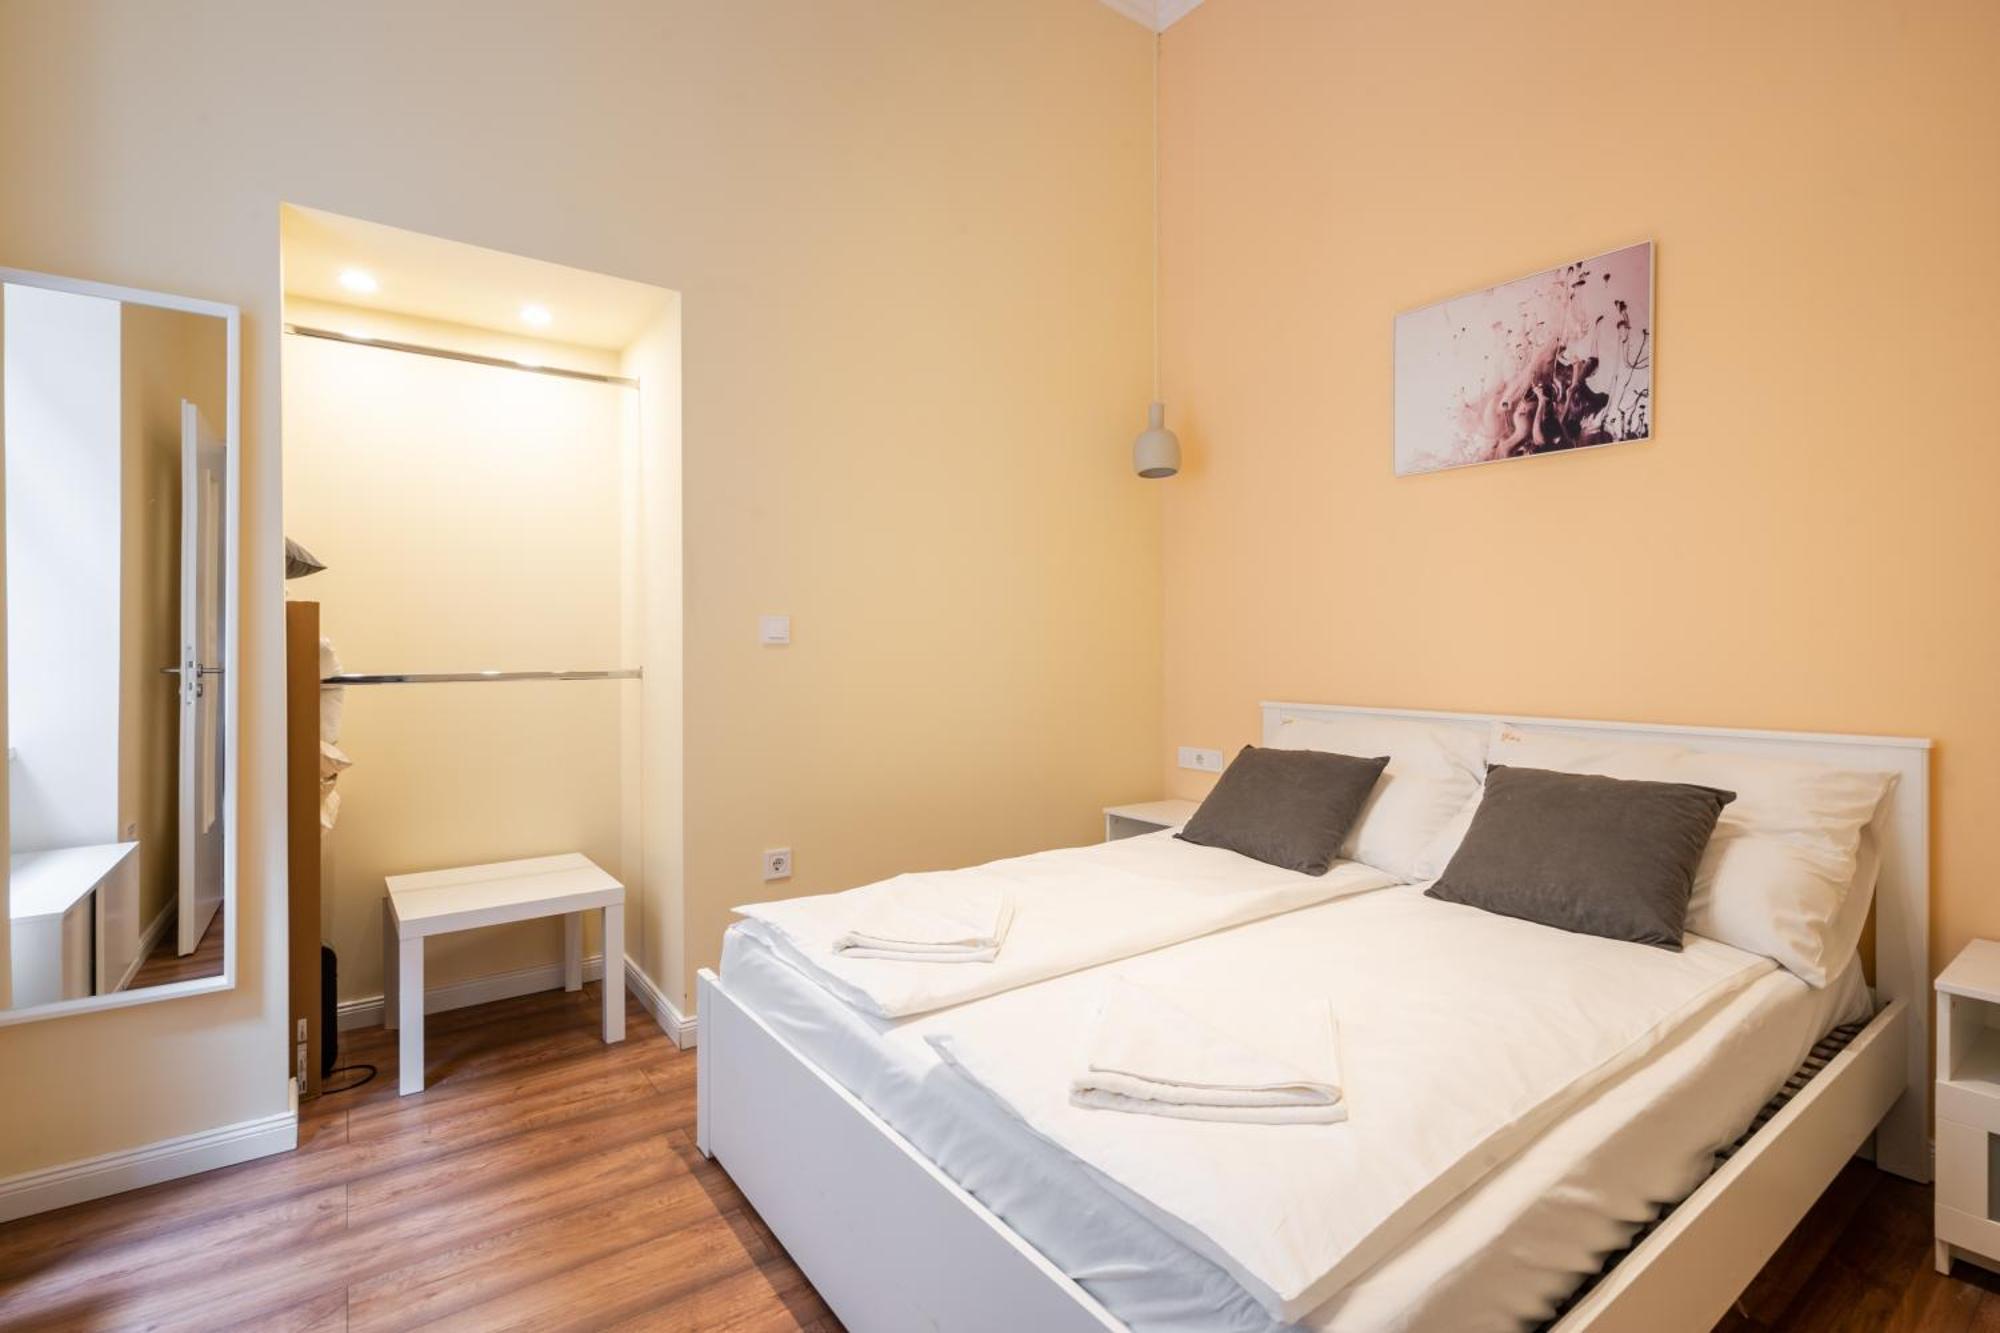 K87- Boutique Apartments, Best Location. By Bqa Budapest Ruang foto